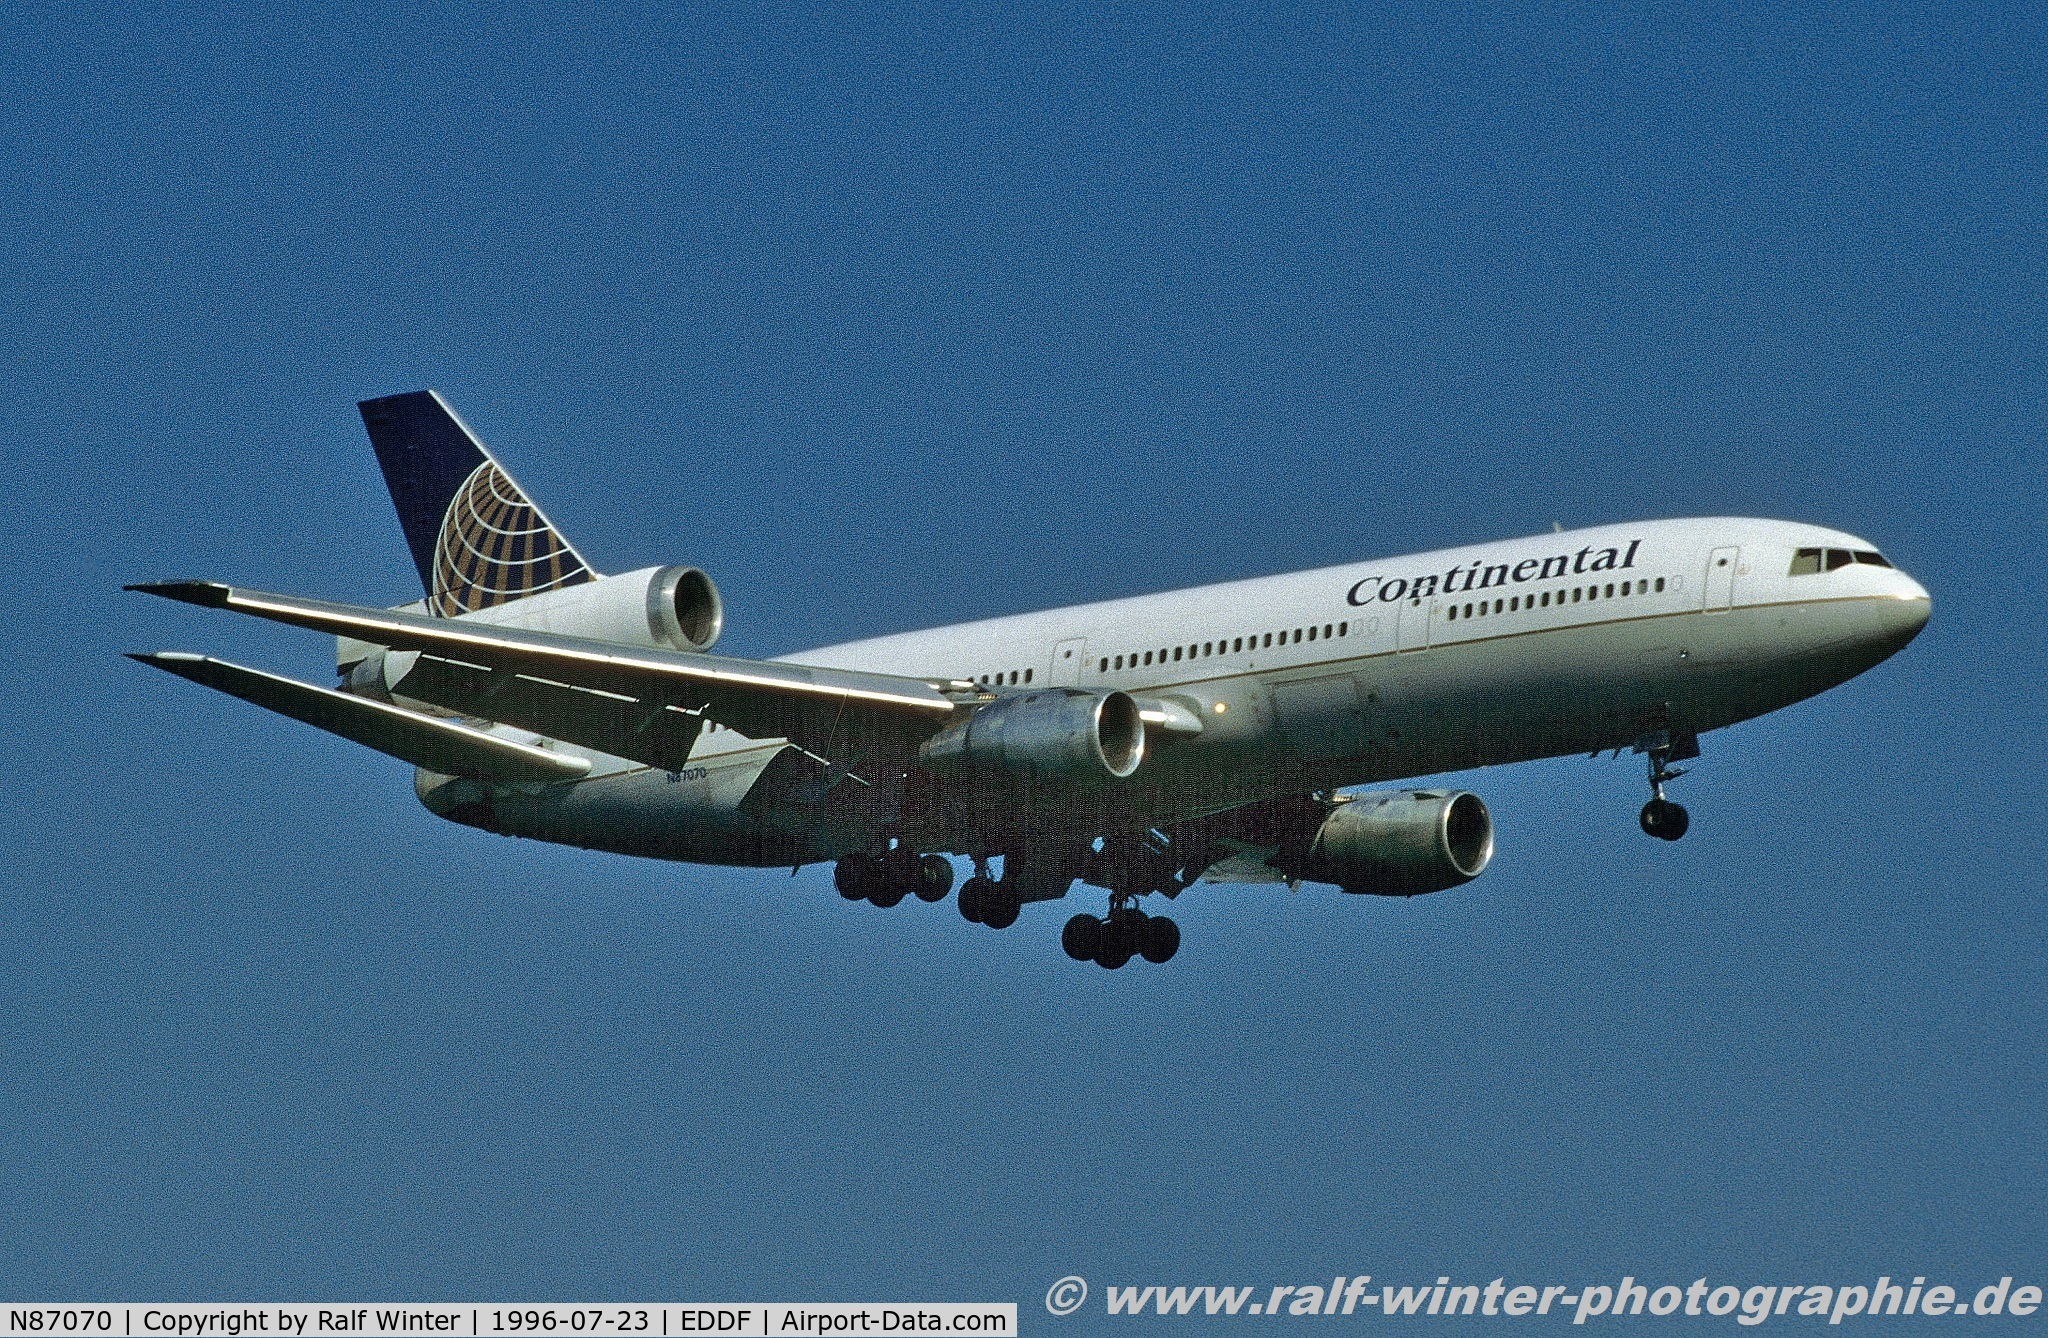 N87070, 1982 McDonnell Douglas DC-10-30 C/N 48292, McDonnell Douglas DC-10-30 - Continental Airlines - 48292 - N87070 - 23.07.1996 - FRA